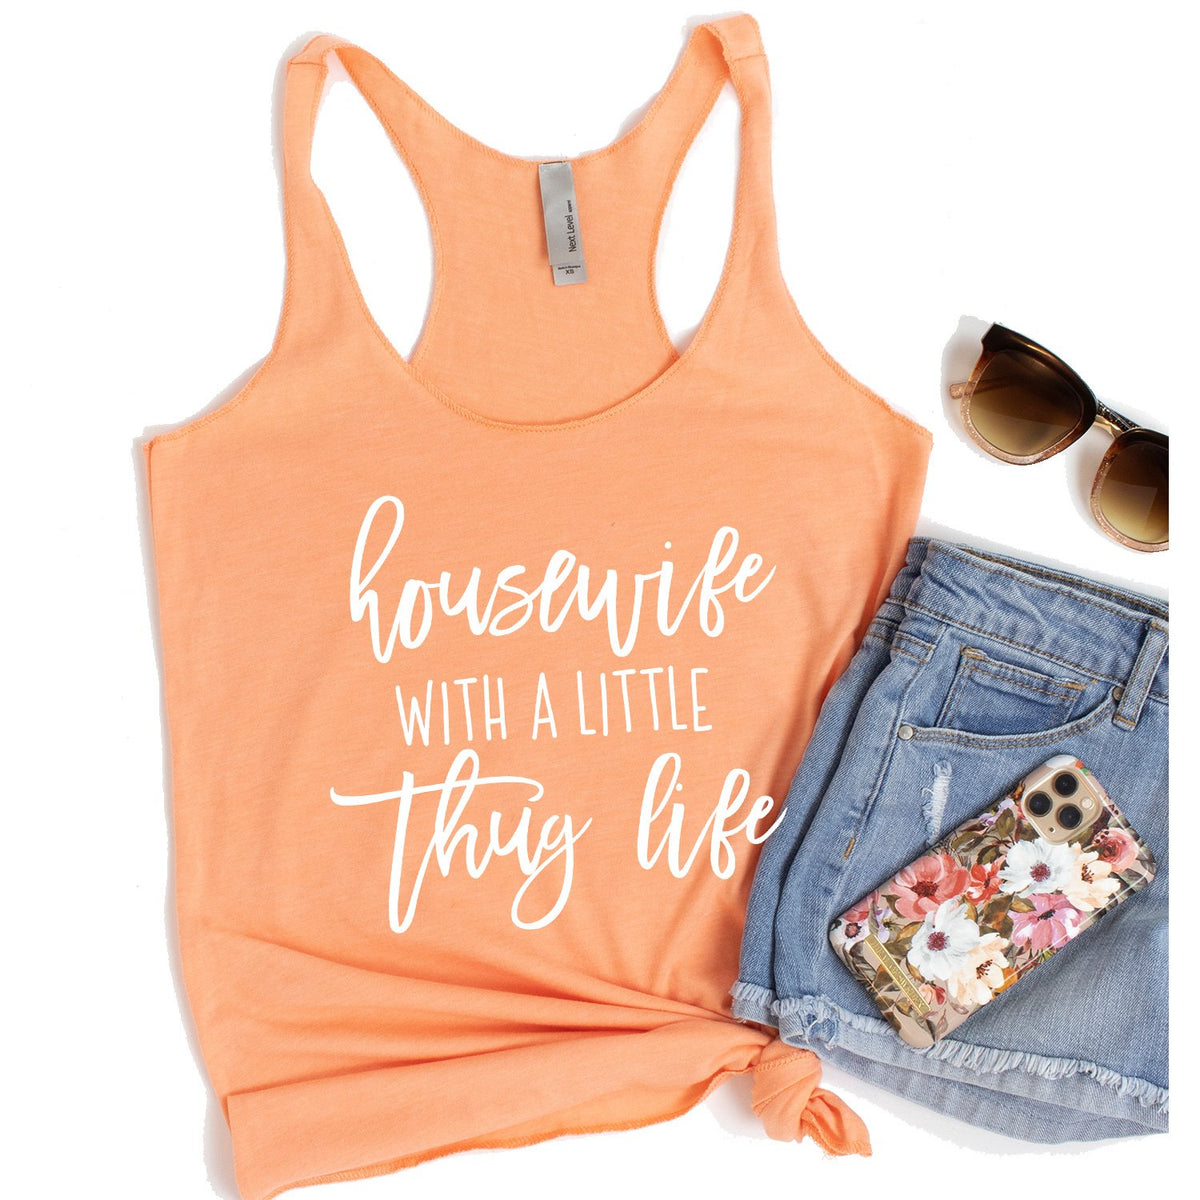 Housewife With A Little Thug Life - Tank Top Racerback